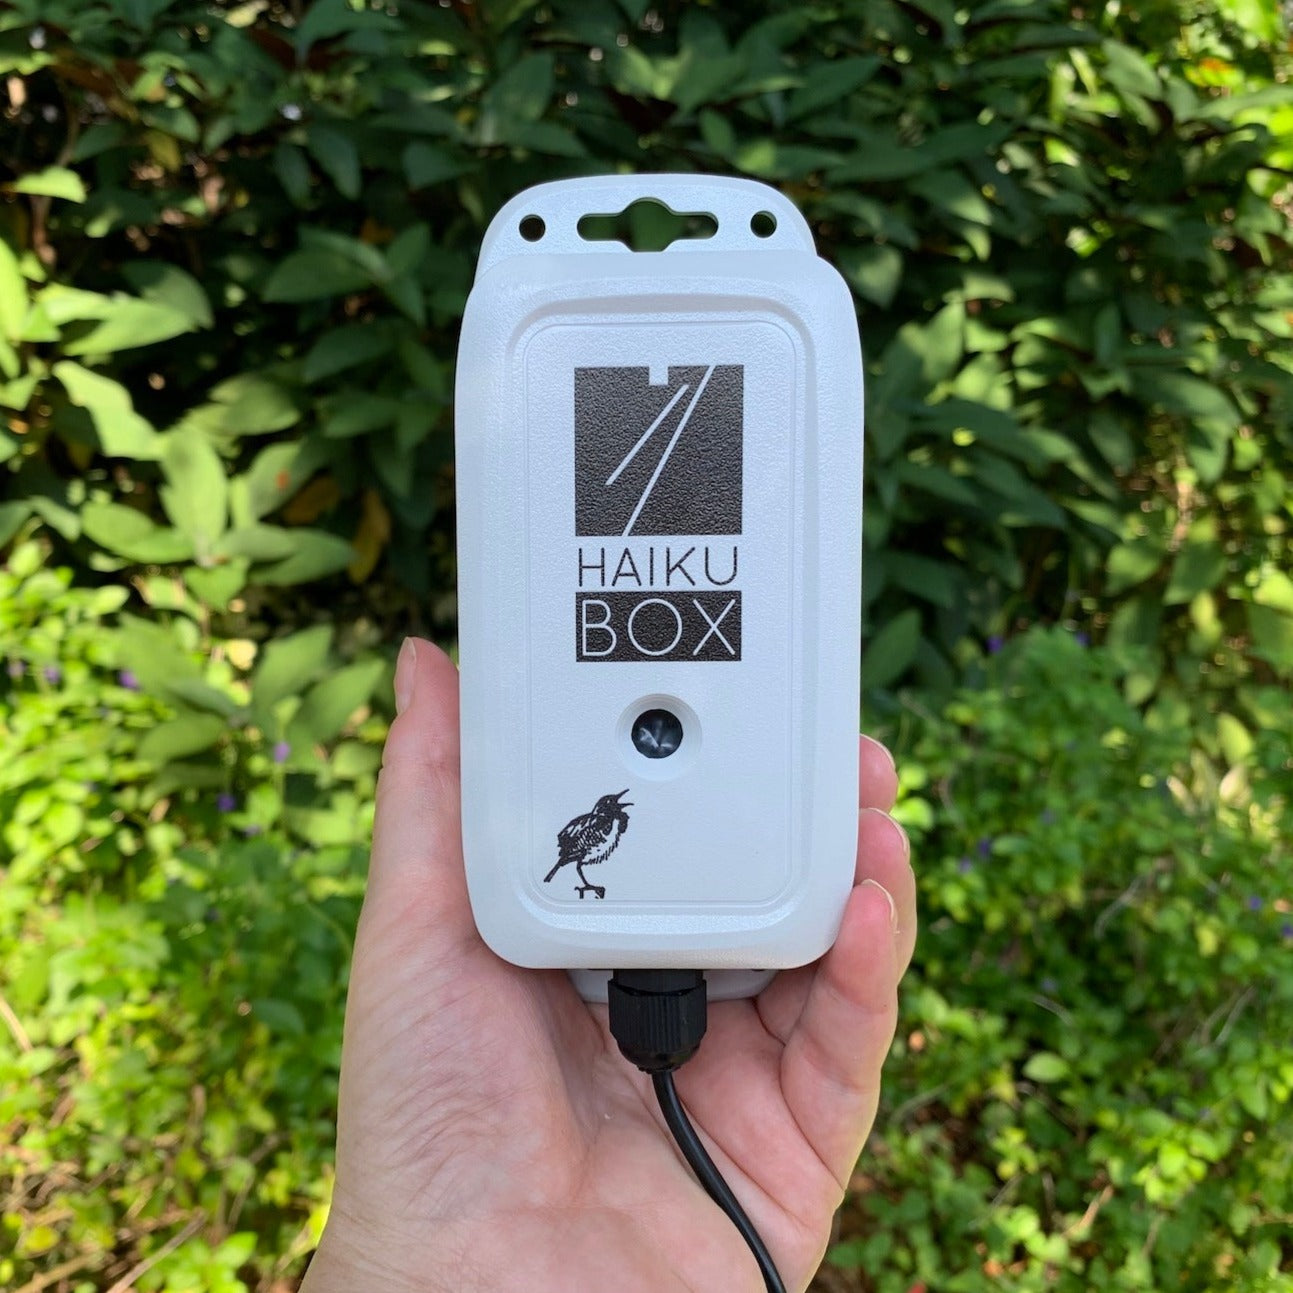 Haikubox for birdsong identification and data collection